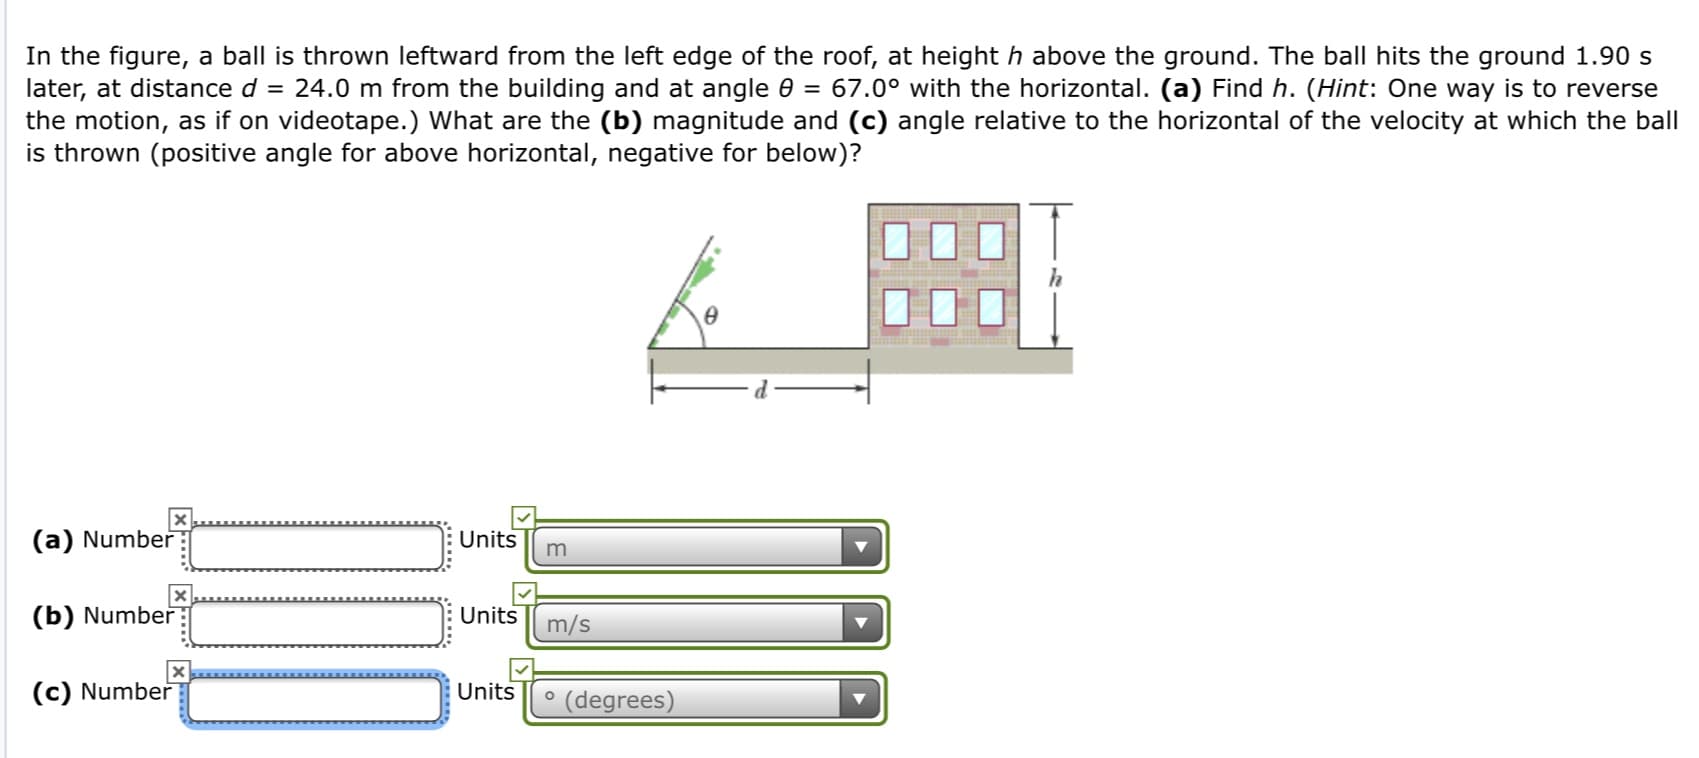 In the figure, a ball is thrown leftward from the left edge of the roof, at height h above the ground. The ball hits the ground 1.90 s
later, at distance d = 24.0 m from the building and at angle 0 = 67.0° with the horizontal. (a) Find h. (Hint: One way is to reverse
the motion, as if on videotape.) What are the (b) magnitude and (c) angle relative to the horizontal of the velocity at which the ball
is thrown (positive angle for above horizontal, negative for below)?
Units
(a) Number
Units
(b) Number
m/s
(c) Number
Units
° (degrees)
